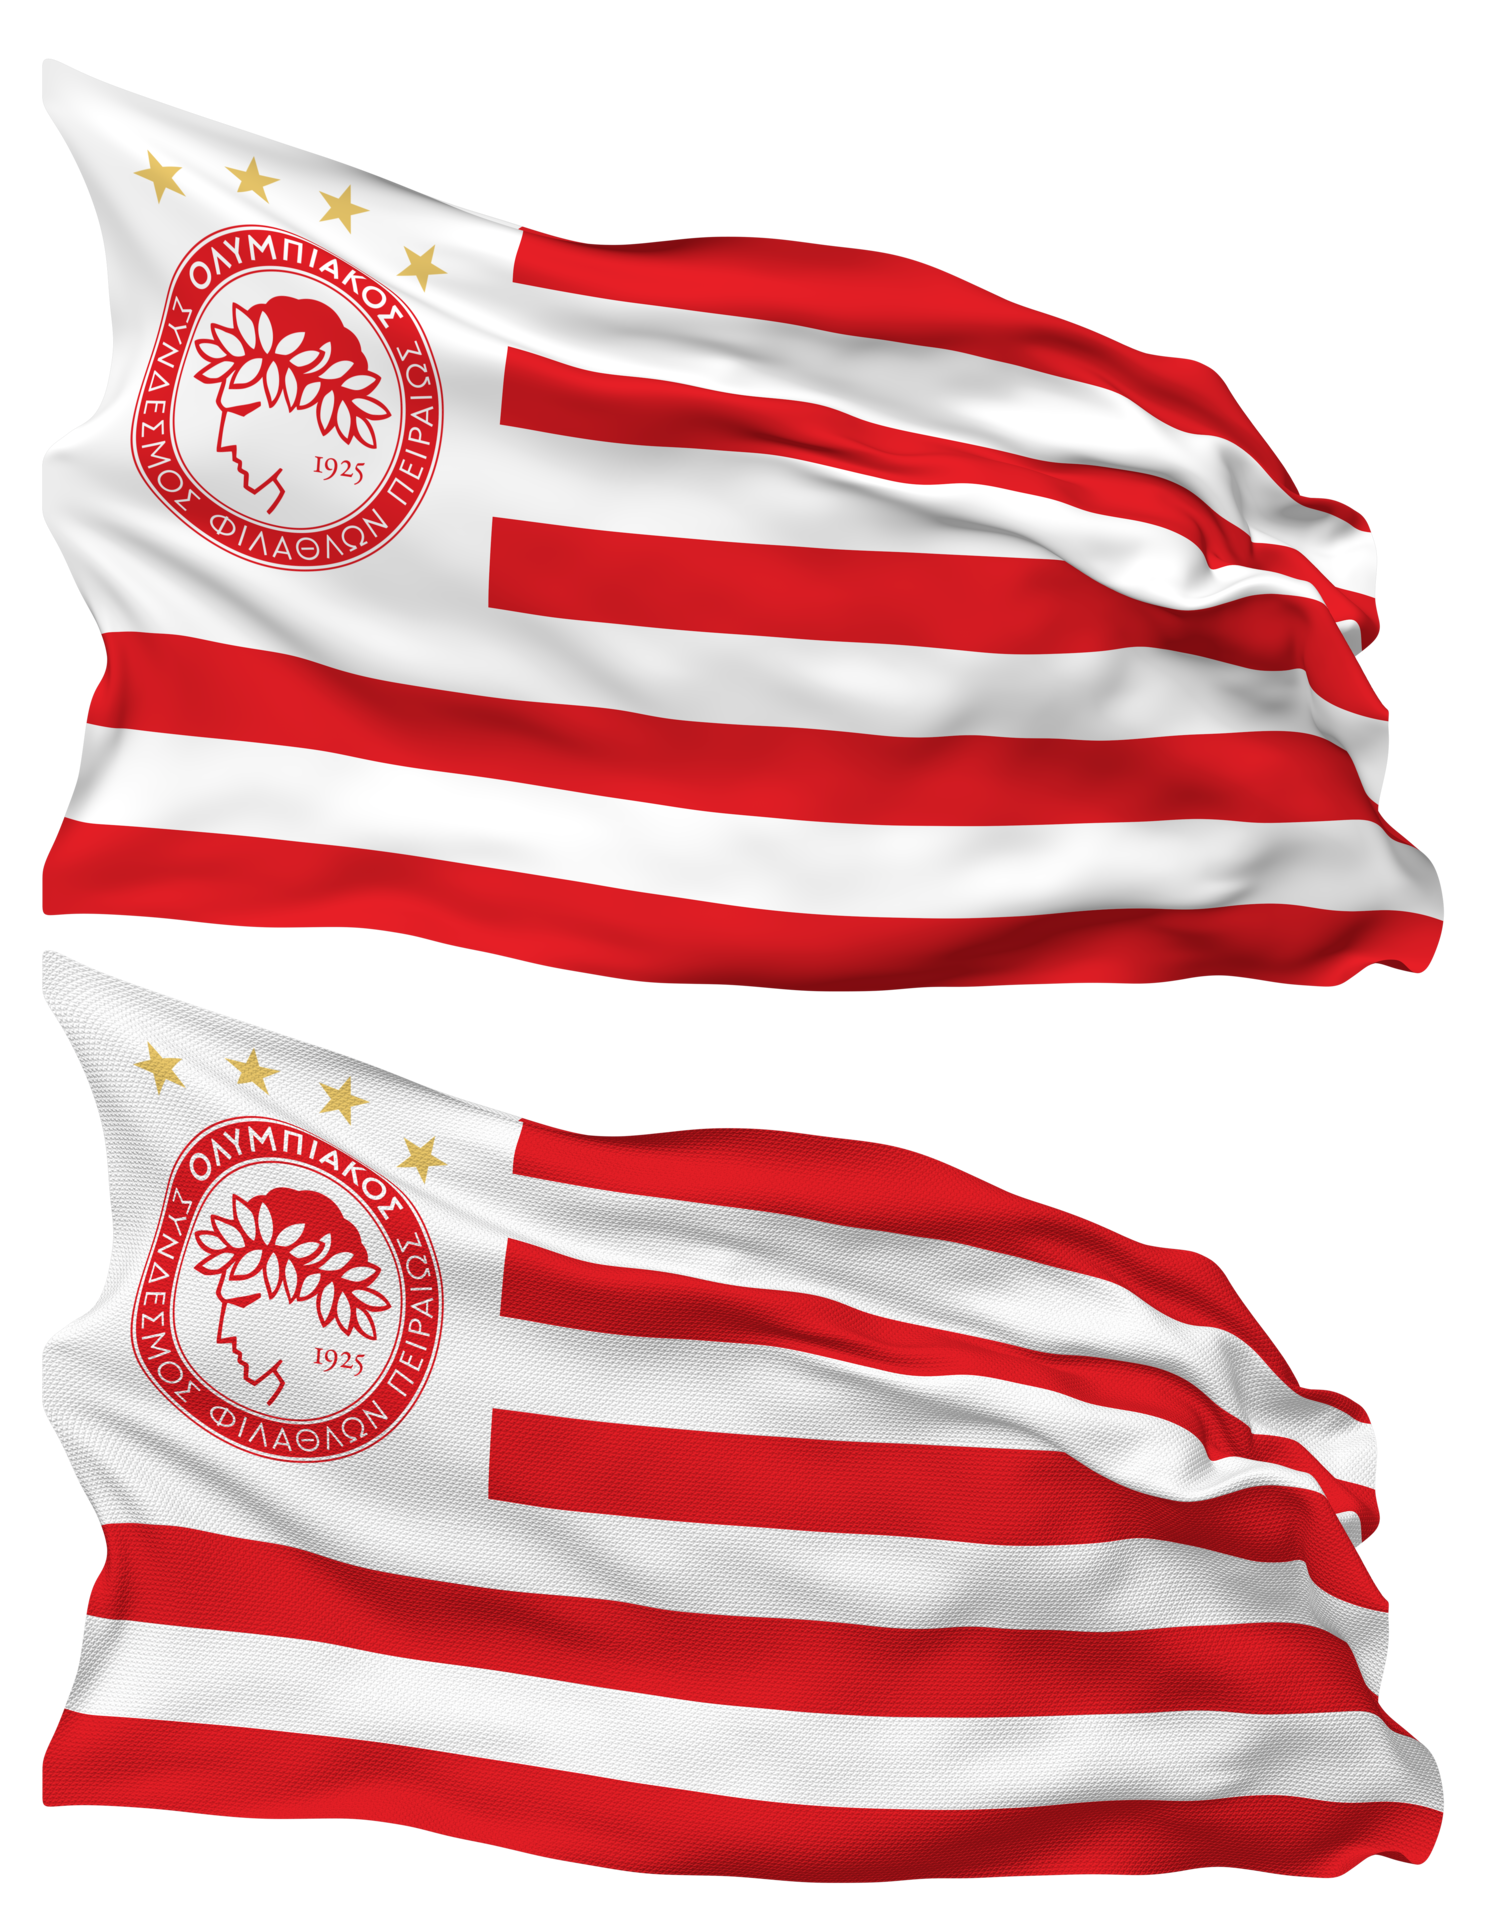 Club Olimpia Flag Waves Isolated in Plain and Bump Texture, with